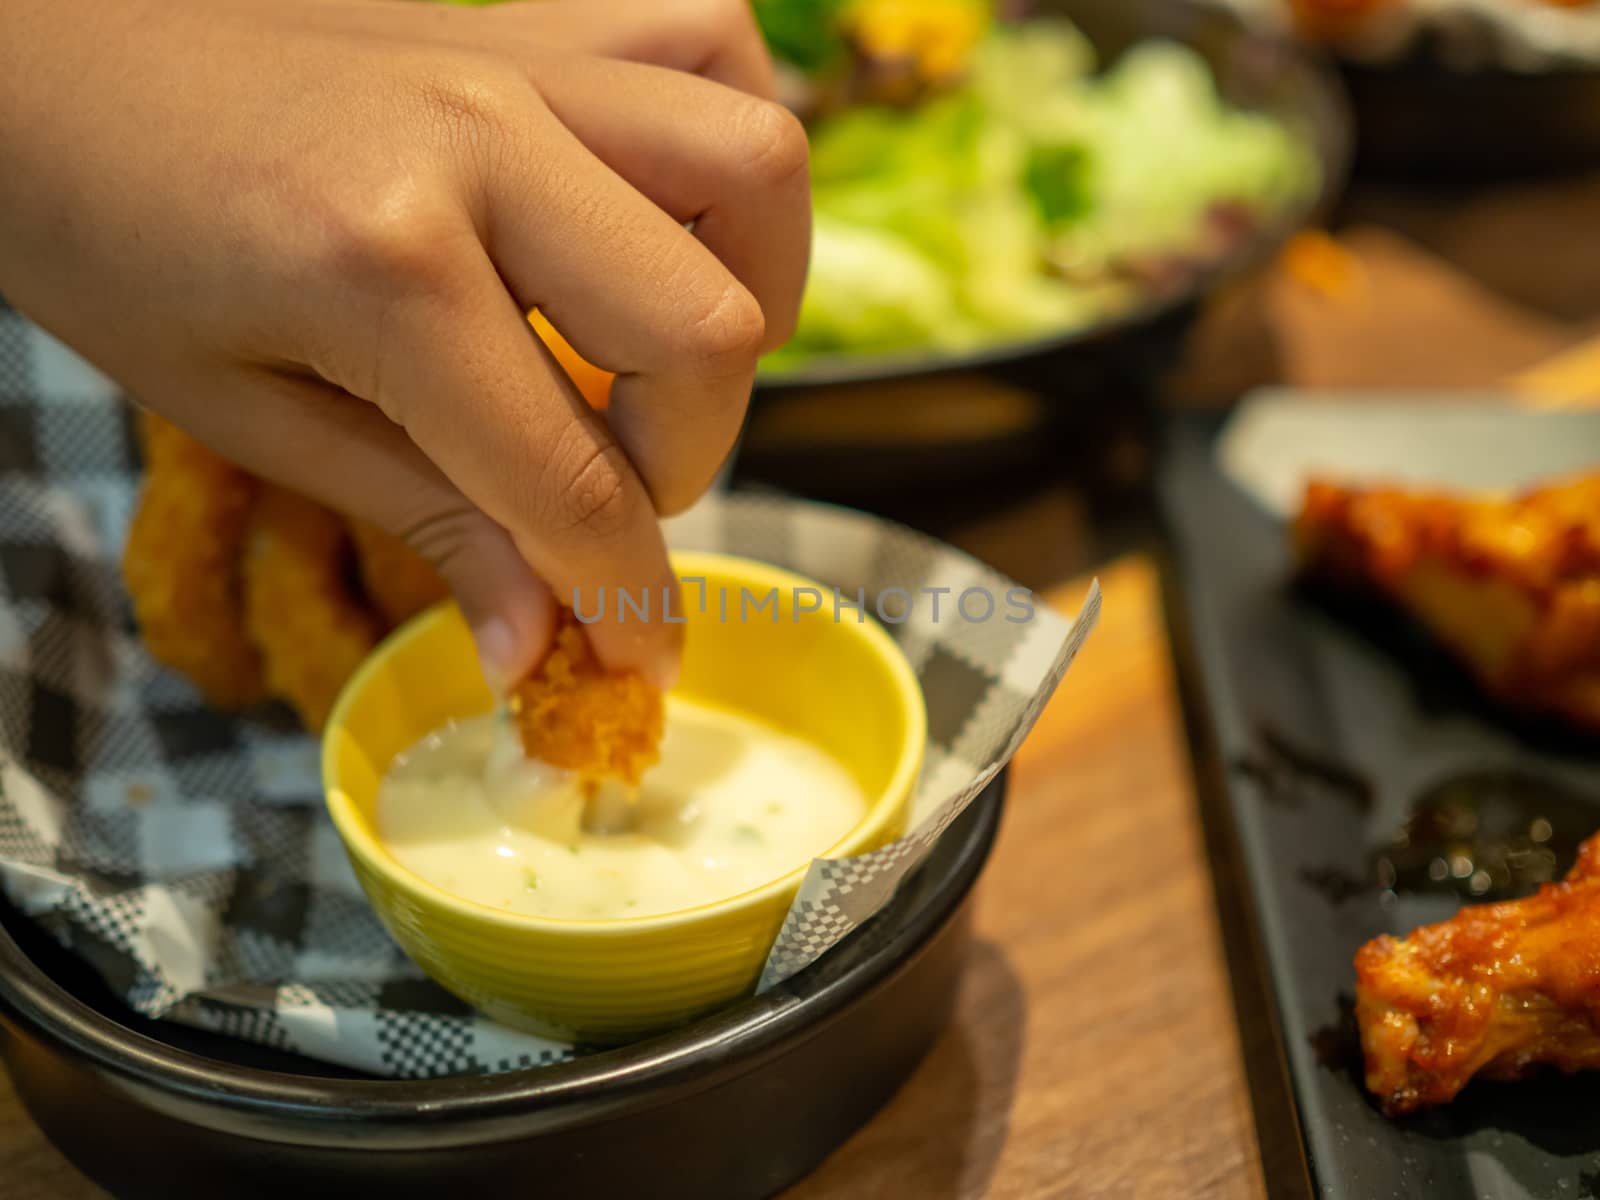 Human hand holding fish finger and dipping on mayonnaise sauce with blurry background.Healthy food or snack for children concept.